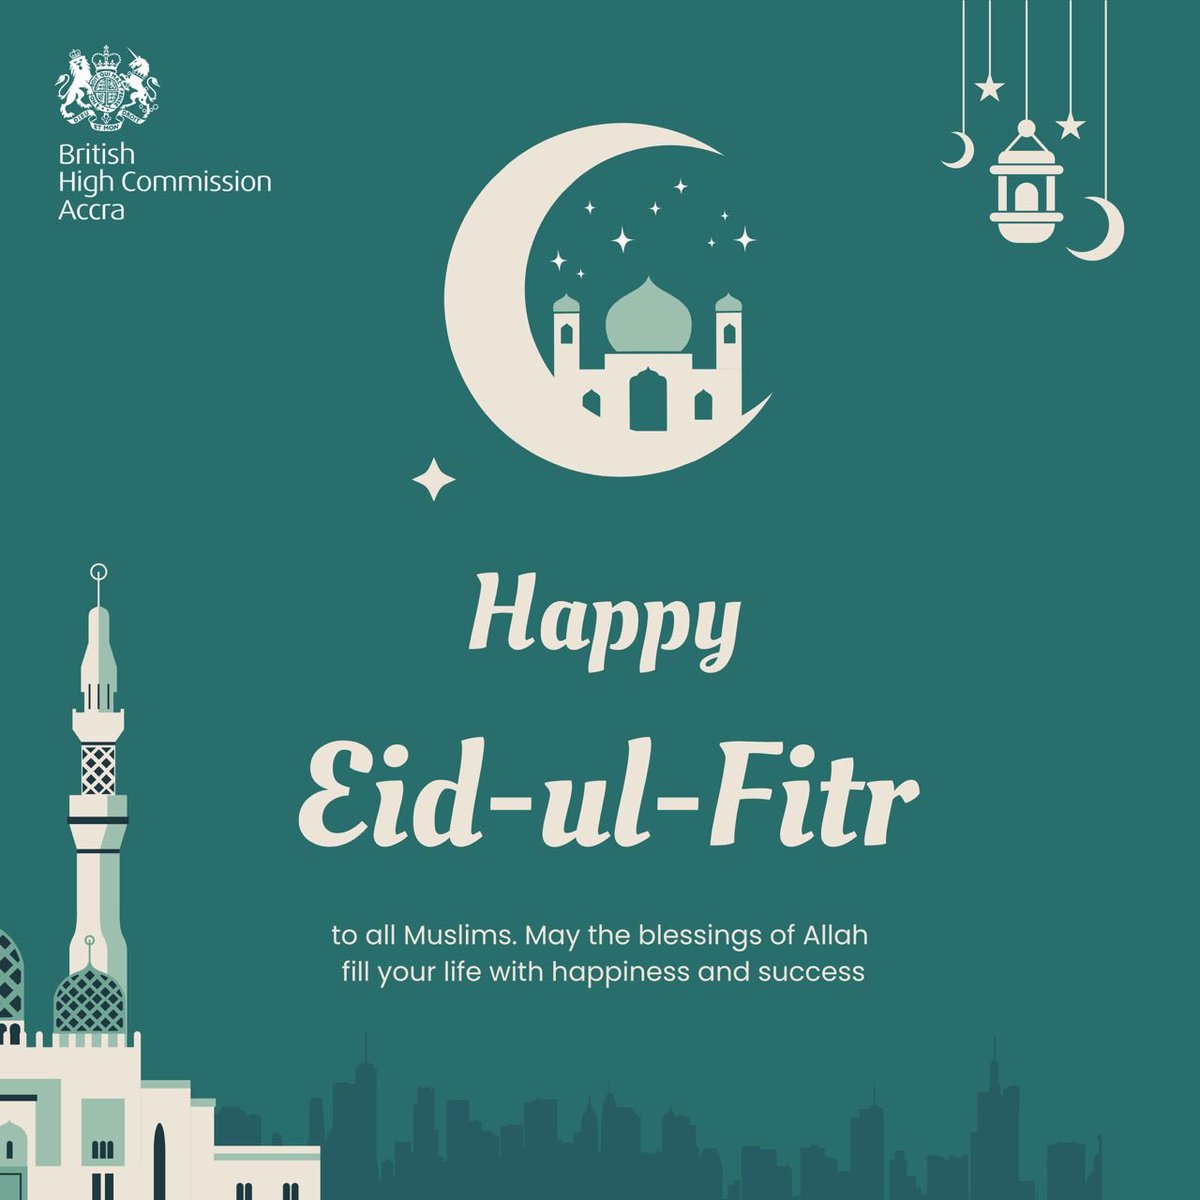 Wishing all those celebrating Eid-ul-Fitr a joyful and blessed day filled with love, peace and happiness! #EidMubarak